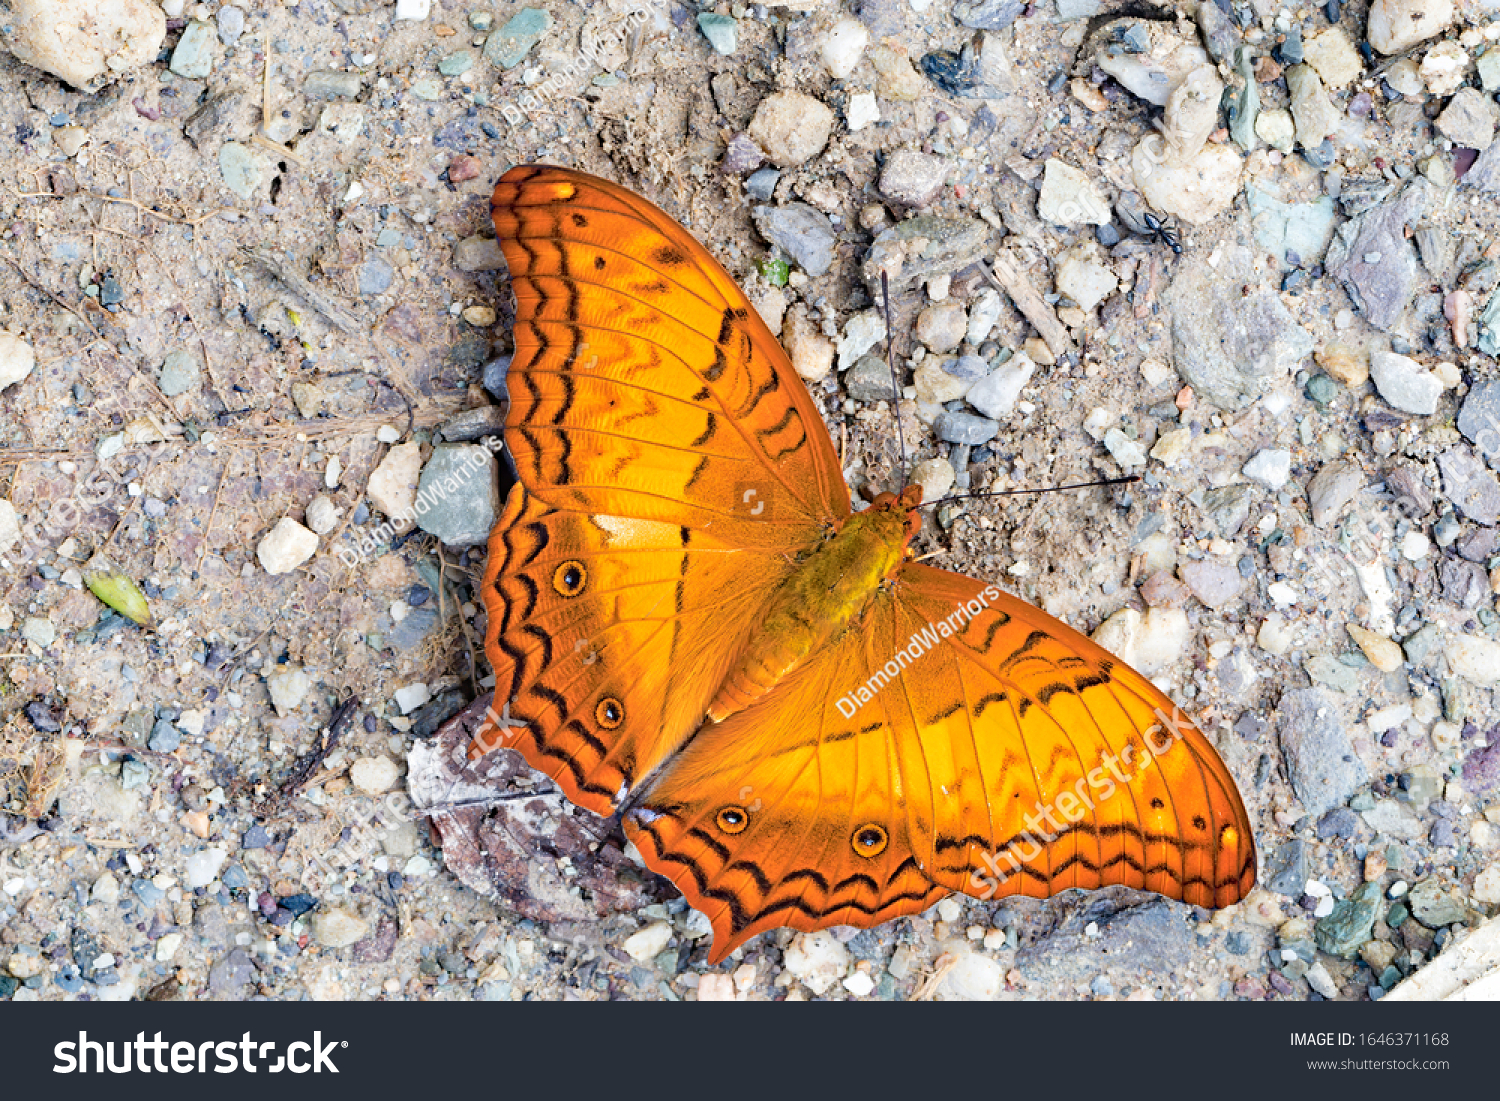 Vindula erota, the common cruiser, is a species of nymphalid butterfly found in forested areas of tropical South Asia and Southeast Asia. #1646371168